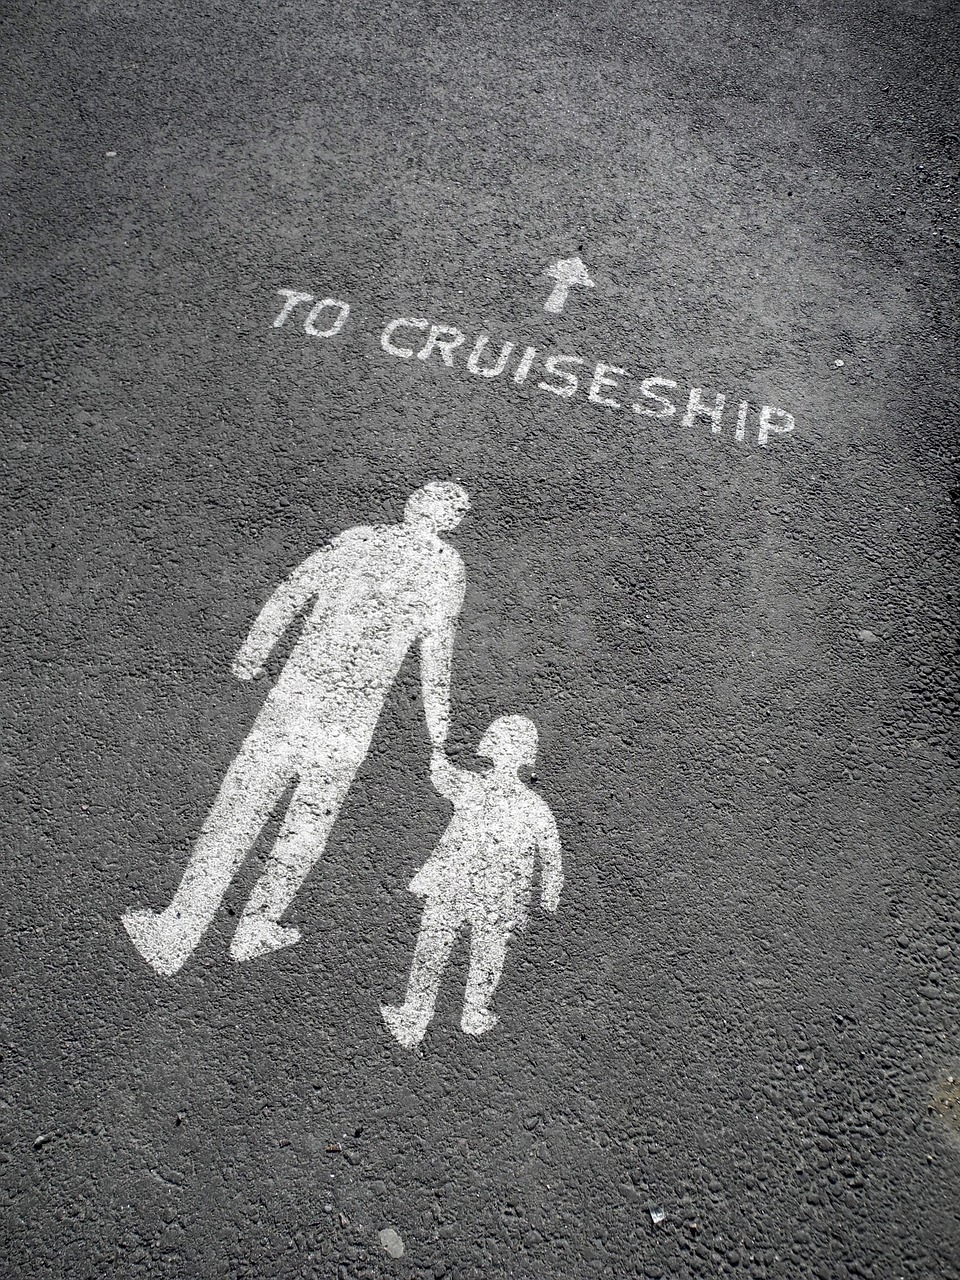 cruise ship directions free photo